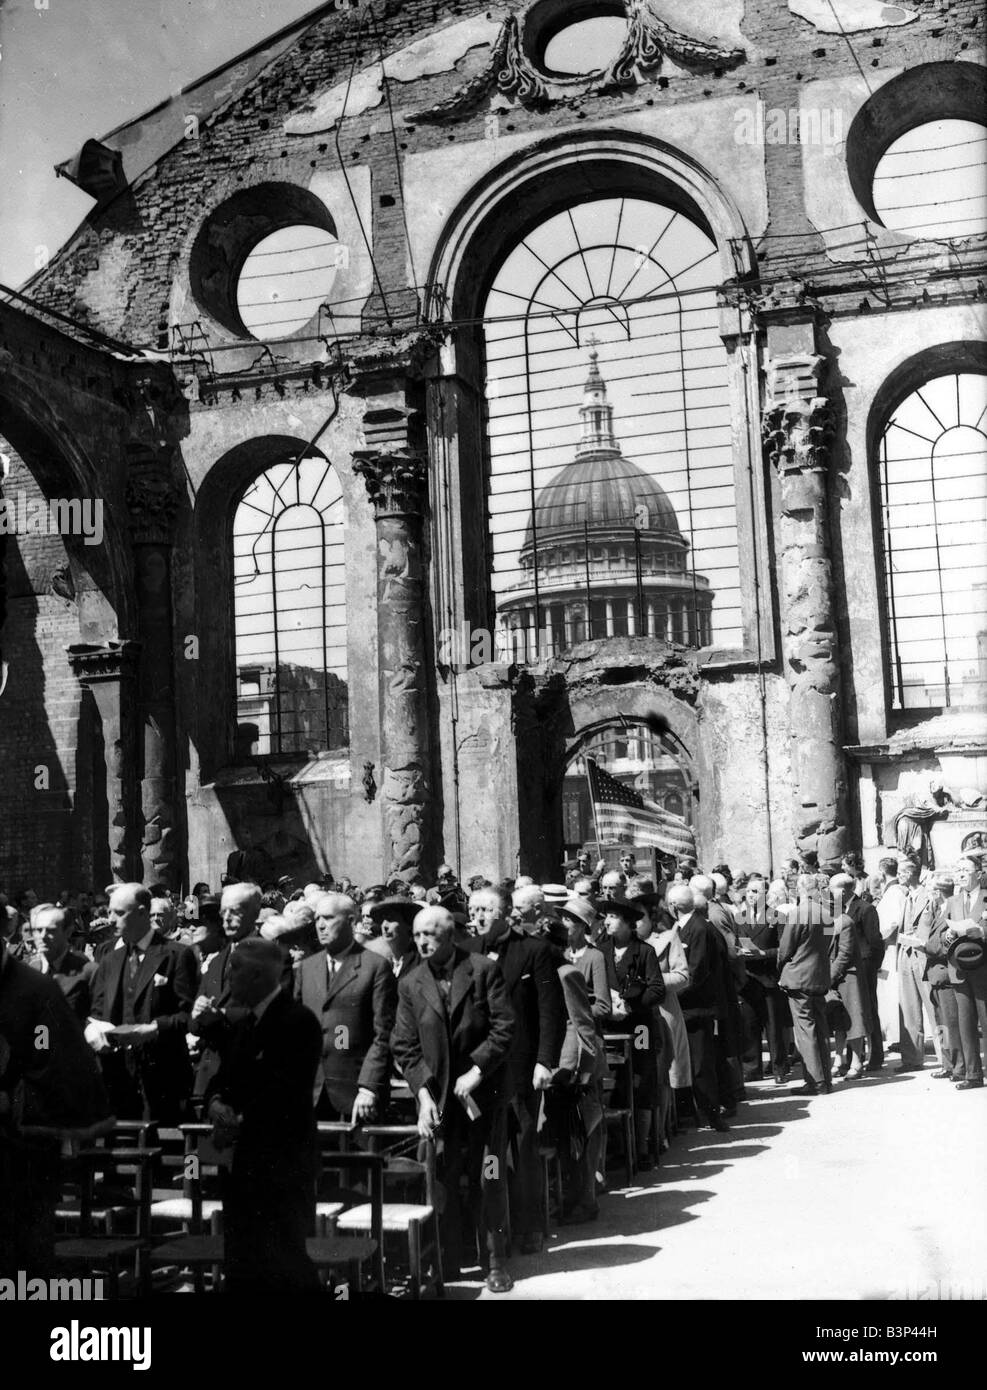 Service being held at St Mary and Bow church in London during the Blitz attack of the German Luftwaffe 1940s Stock Photo